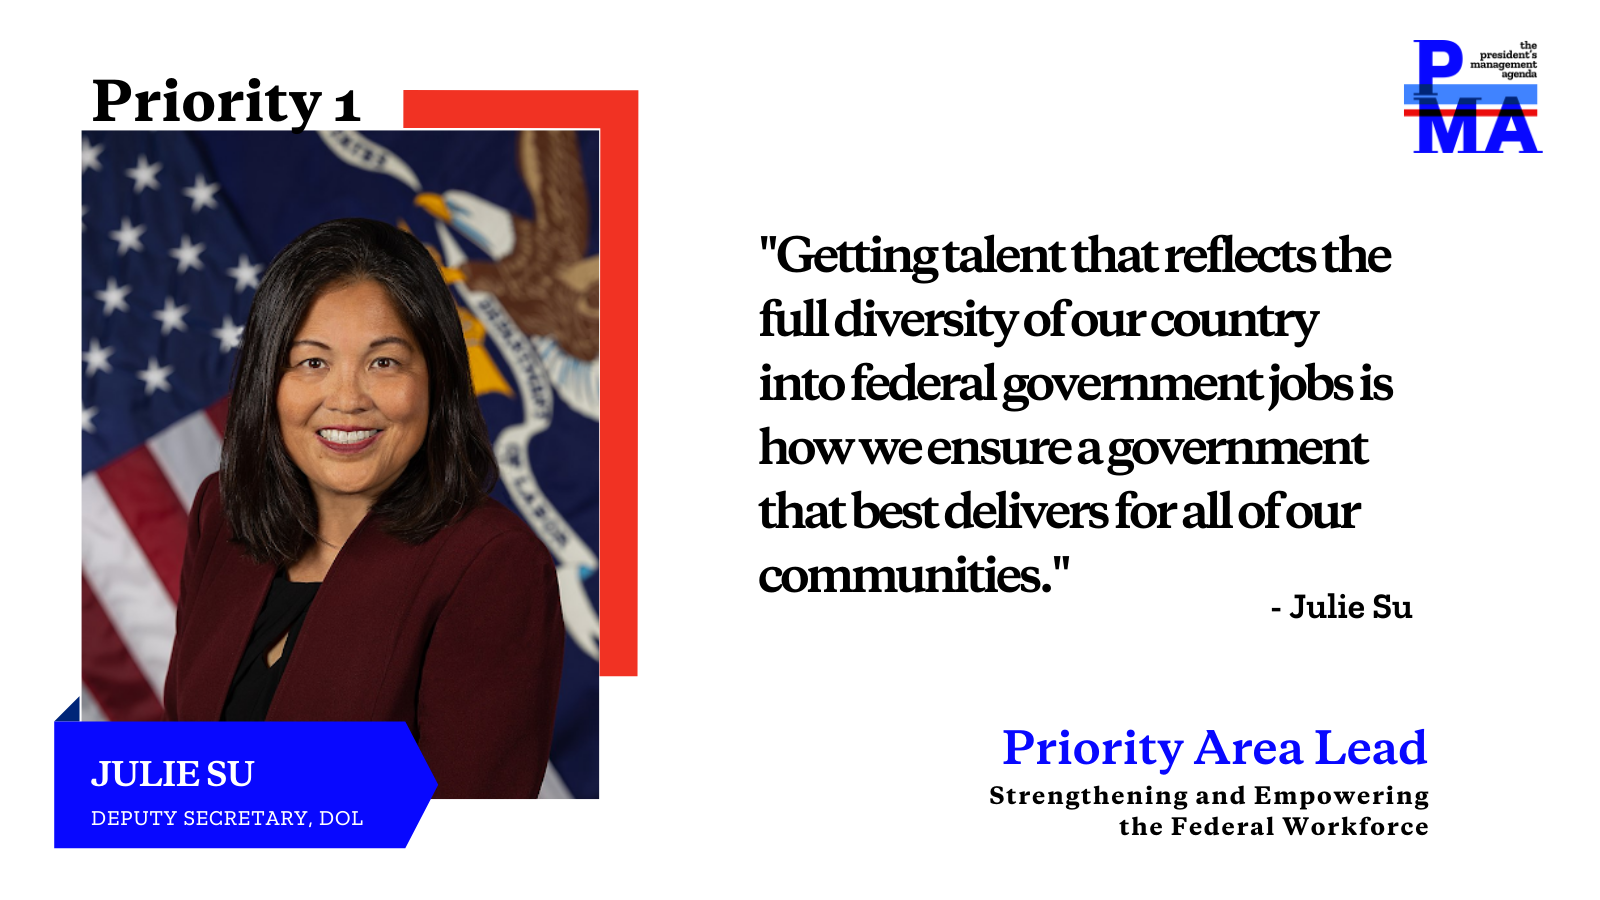 Social card of Julie Su with text: Getting talent that reflects the full diversity of our country into federal government jobs is how we ensure a government that best delivers for all of our communities.